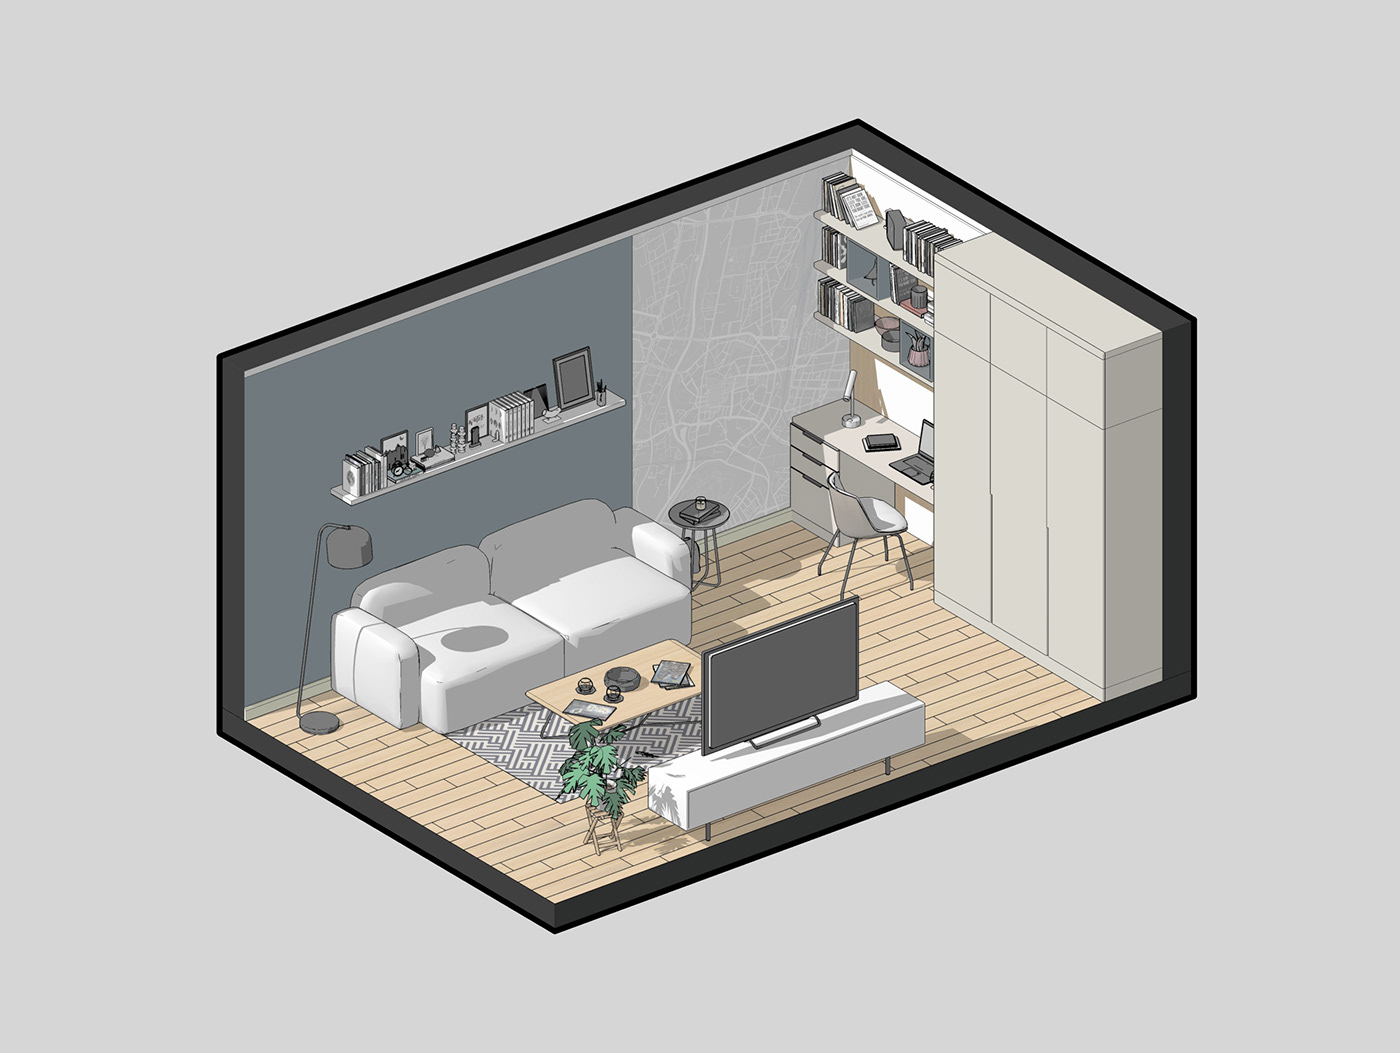 The room's perspective provides a clear view of the layout and interior arrangement.